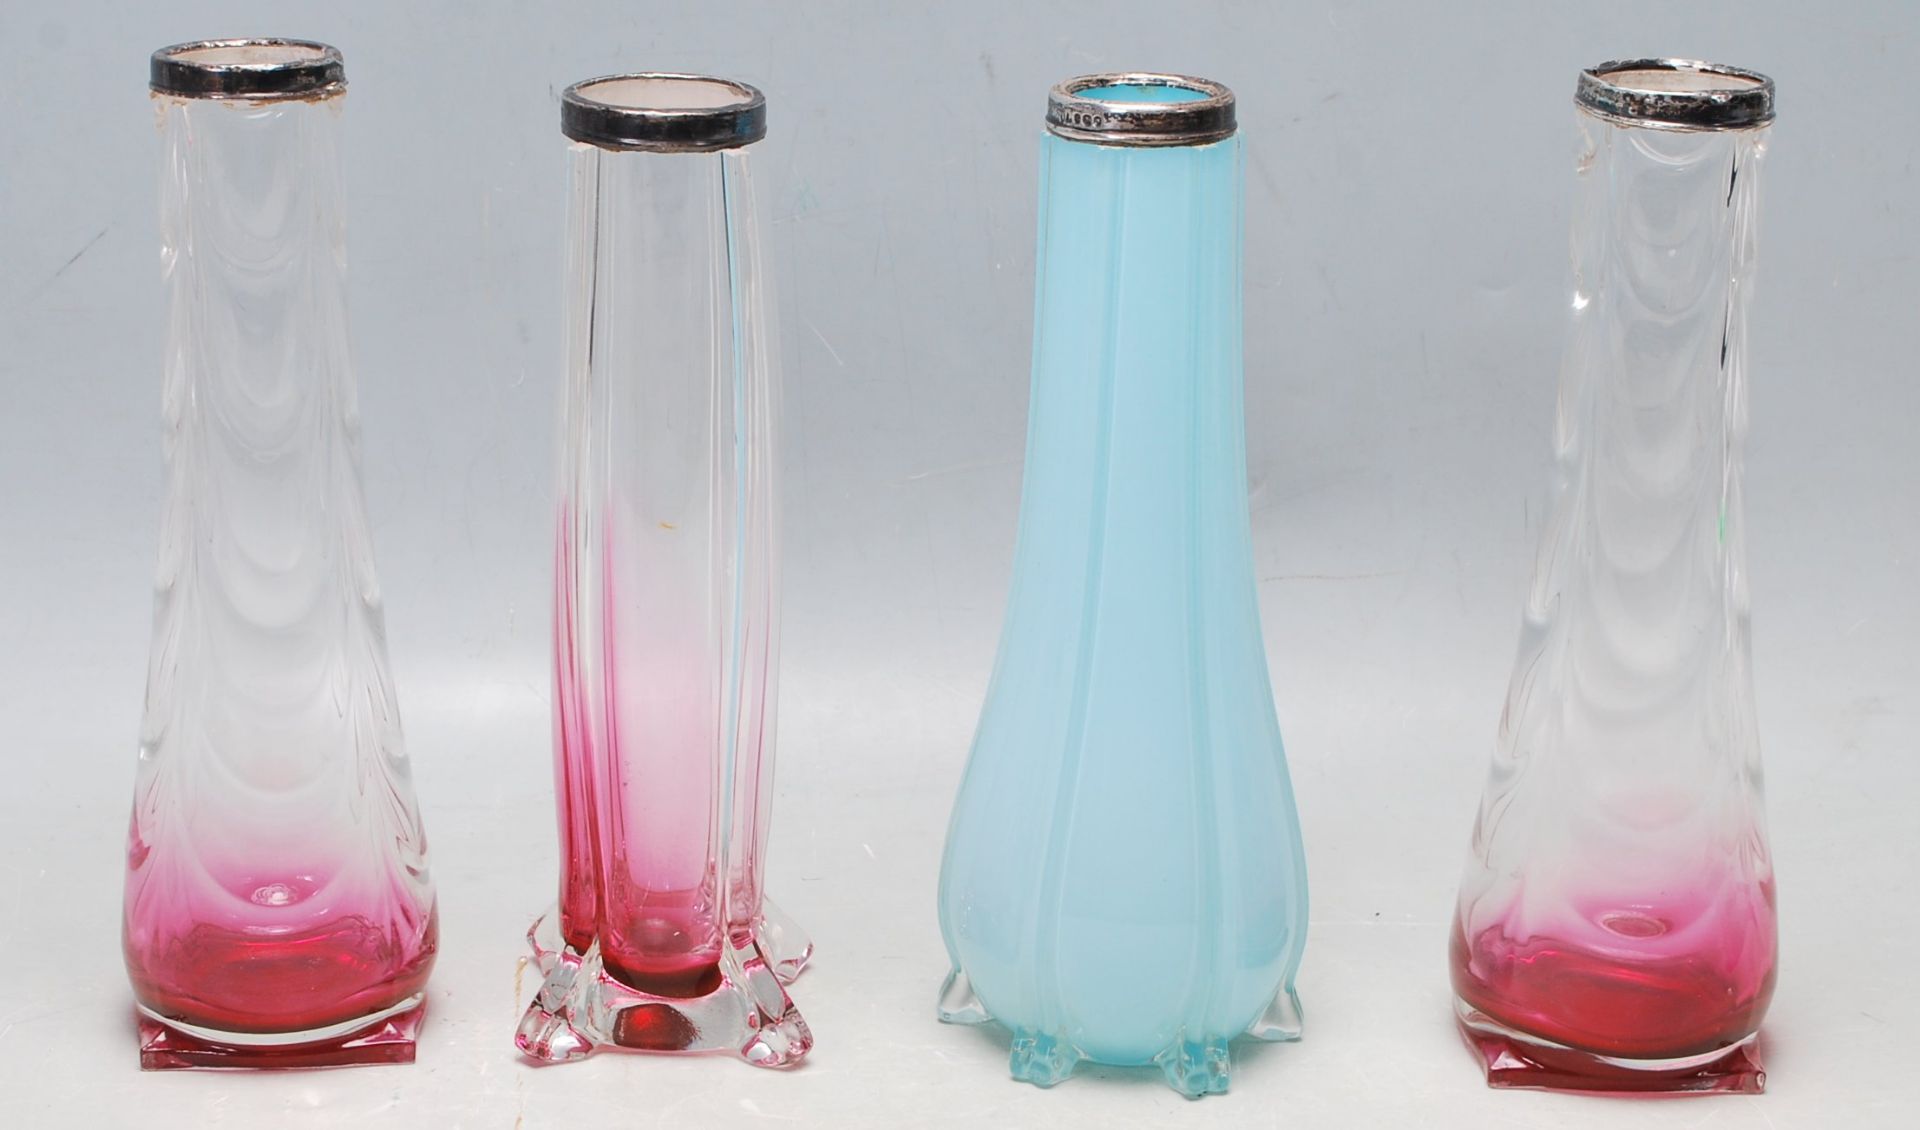 FOUR EARLY 20TH CENTURY STUDIO ART GLASS BALUSTER VASES - Image 2 of 6